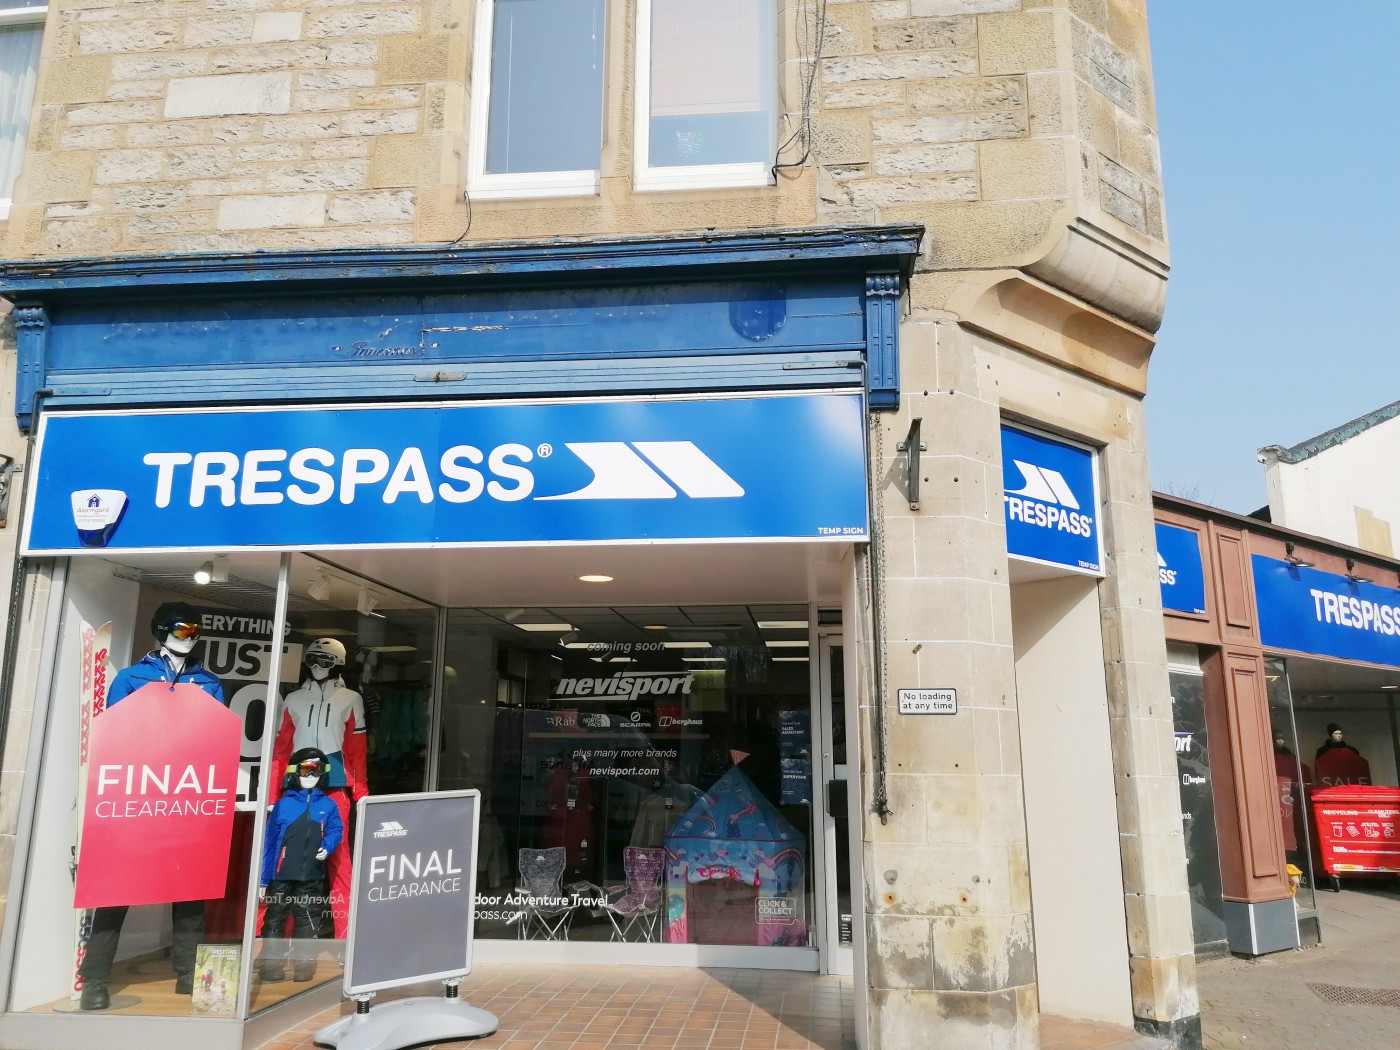 Trespass technical apparel retail shop in Pitlochry